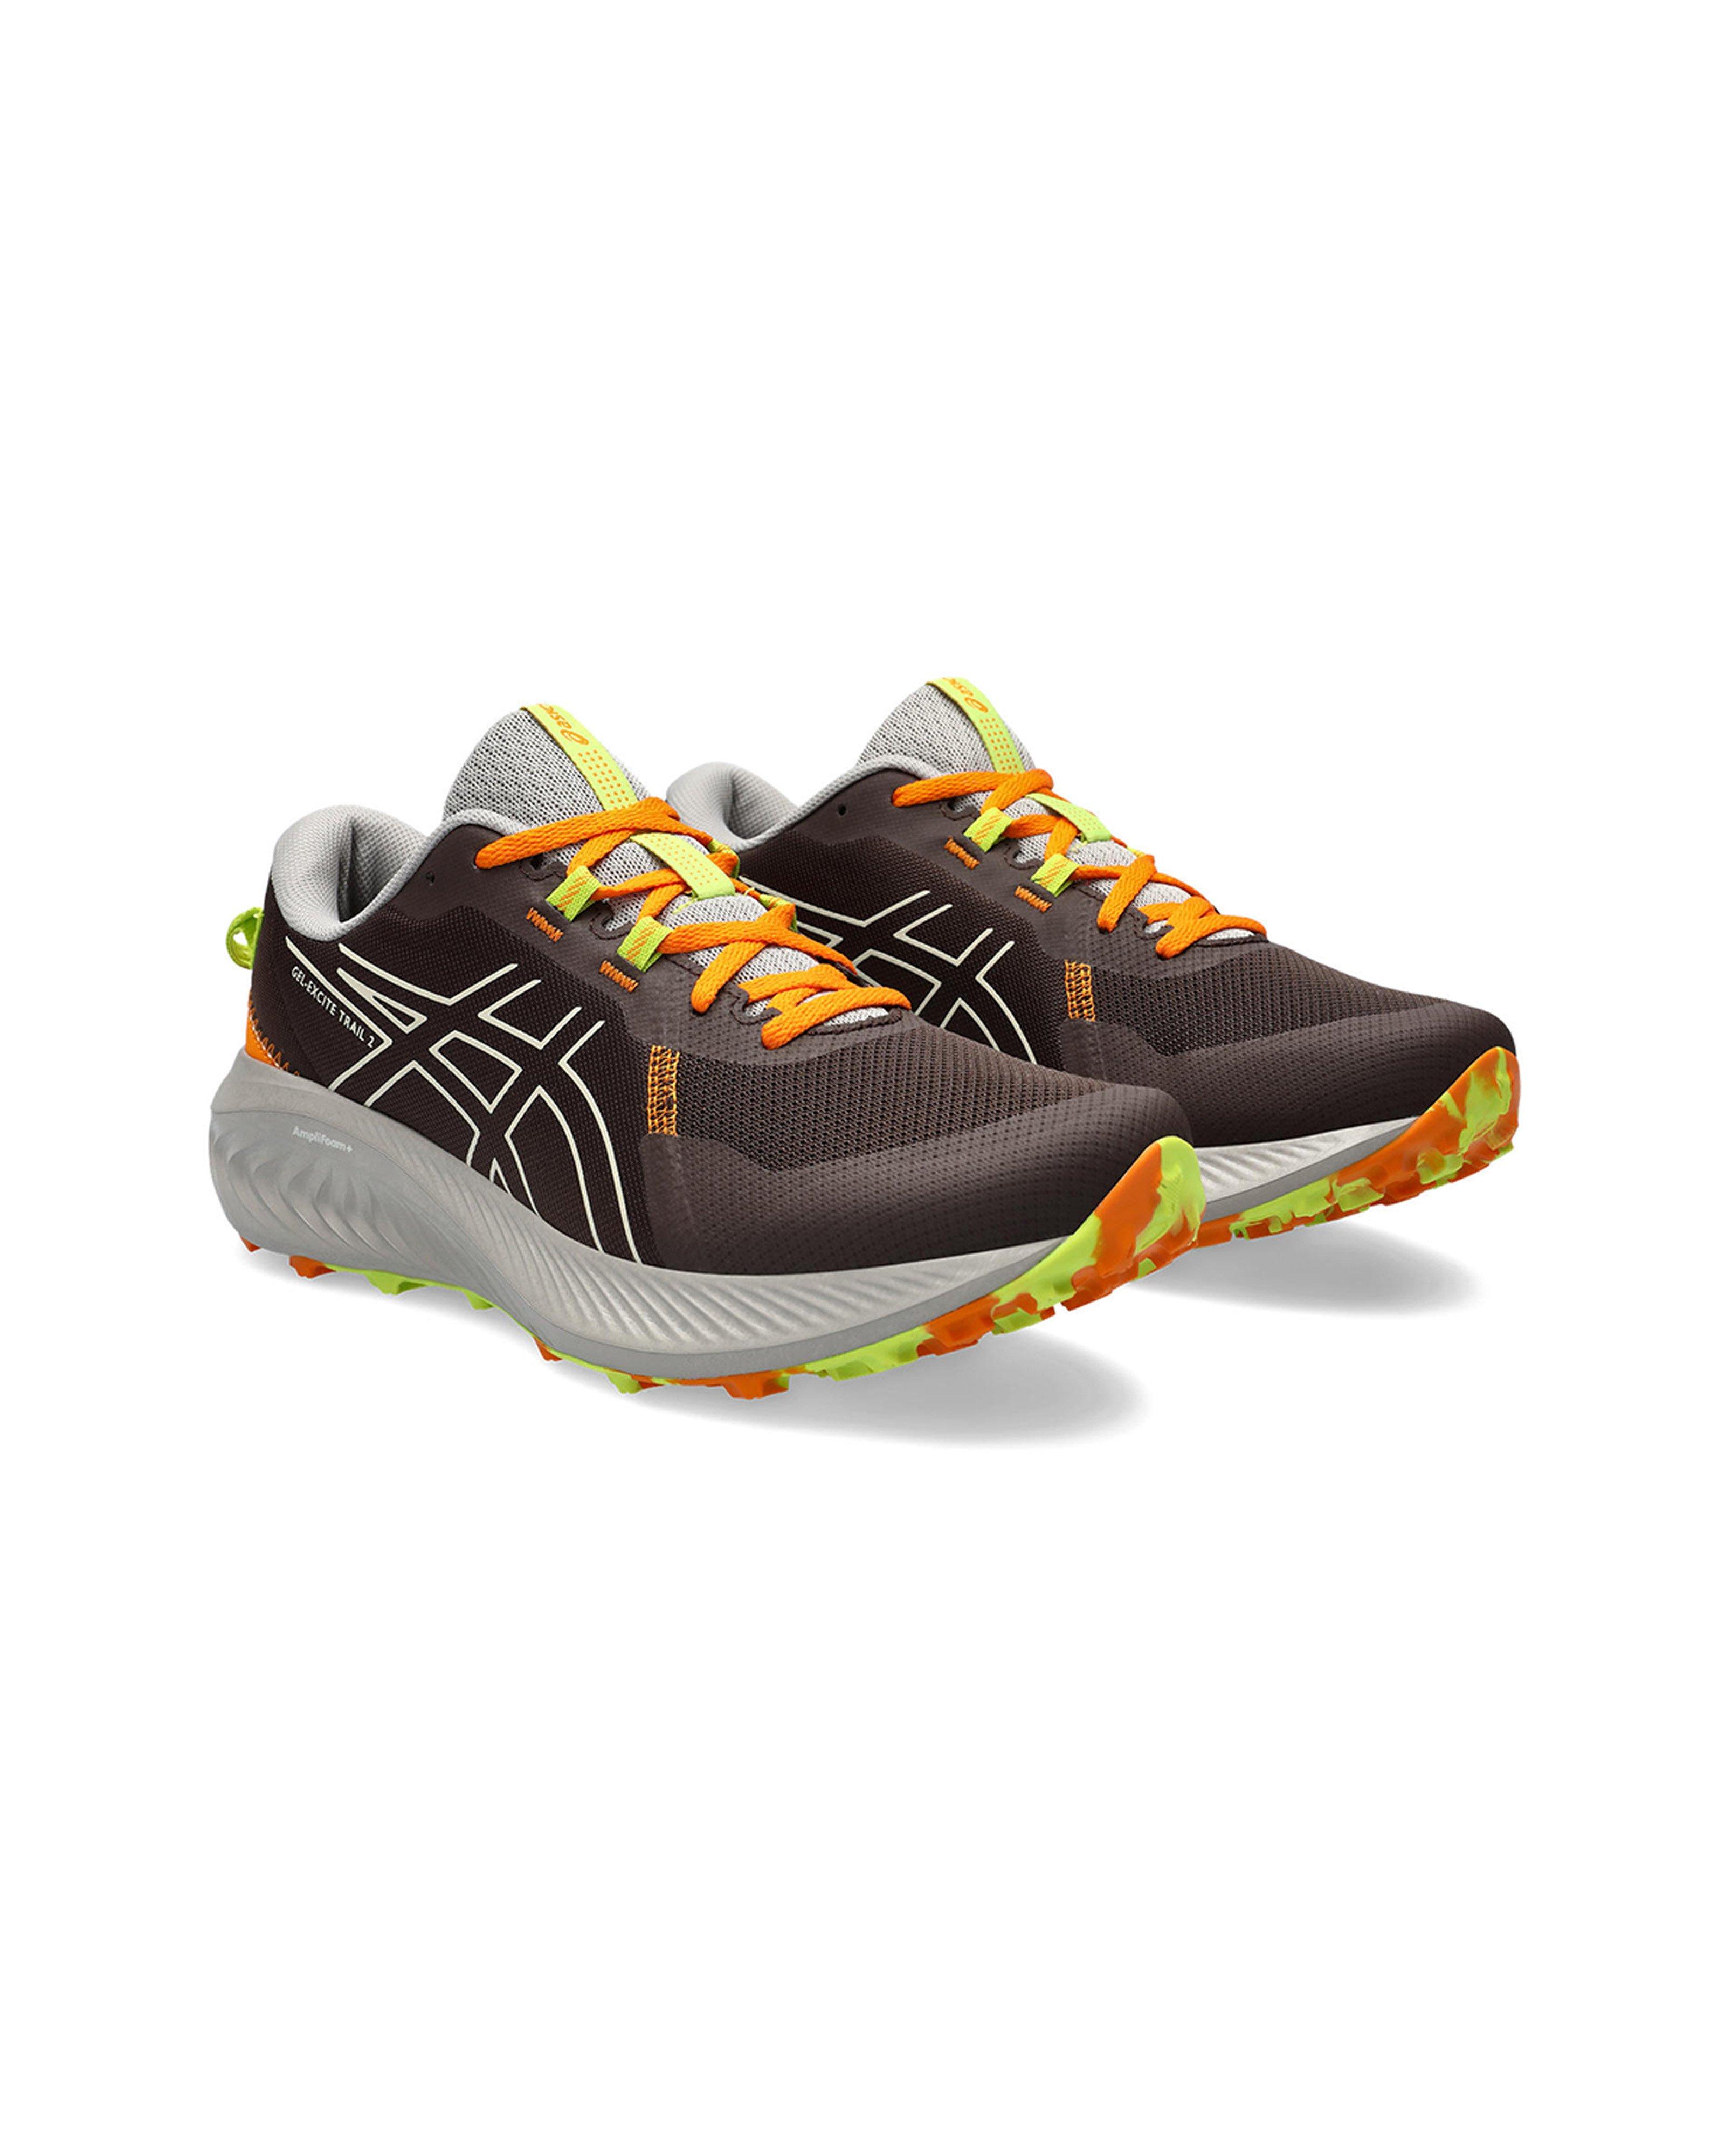 ASICS Men's Gel-Excite Trail 2 Trail Running Shoes